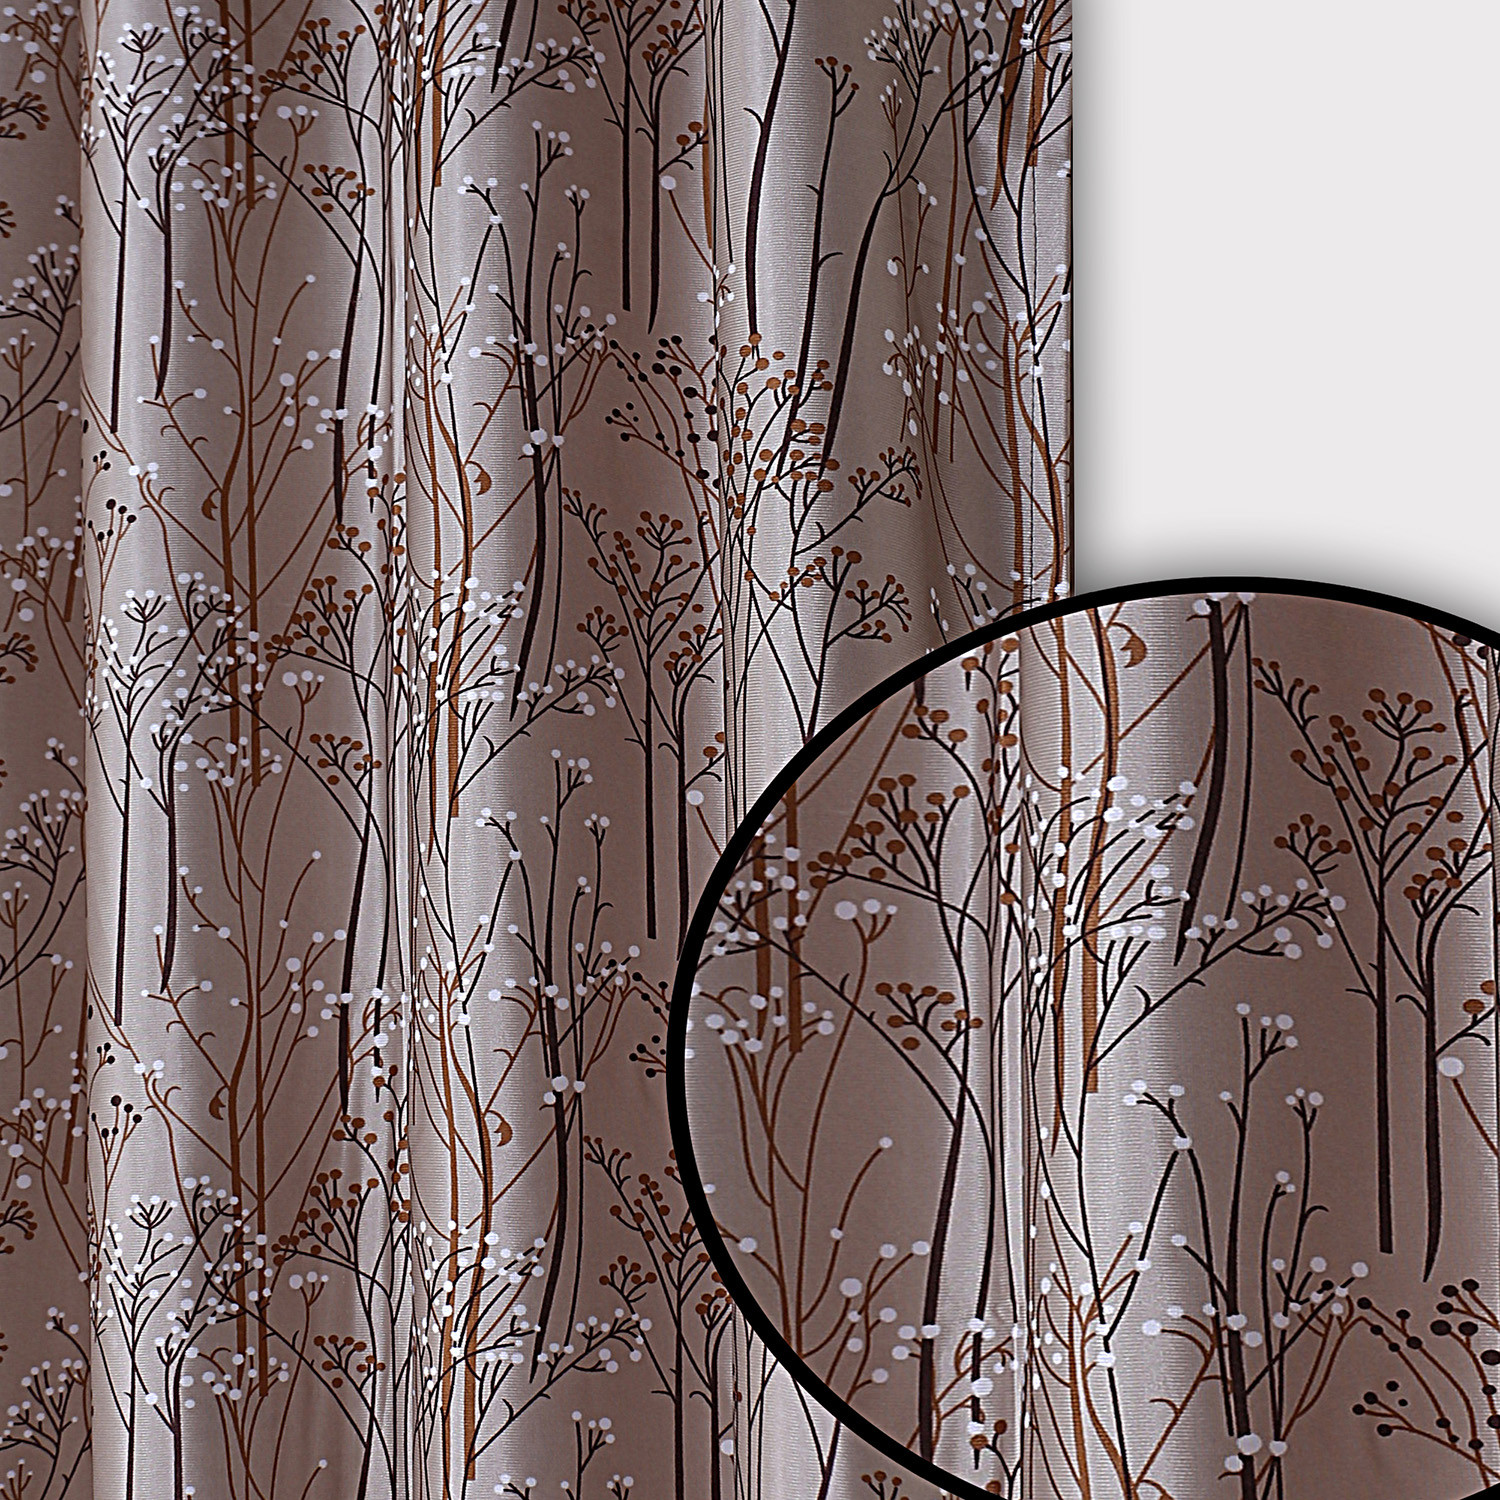 Kuber Industries Polyester Decorative 7 Feet Door Curtain|Tree Branches Print Blackout Drapes Curatin With 8 Eyelet For Home & Office (Coffee)